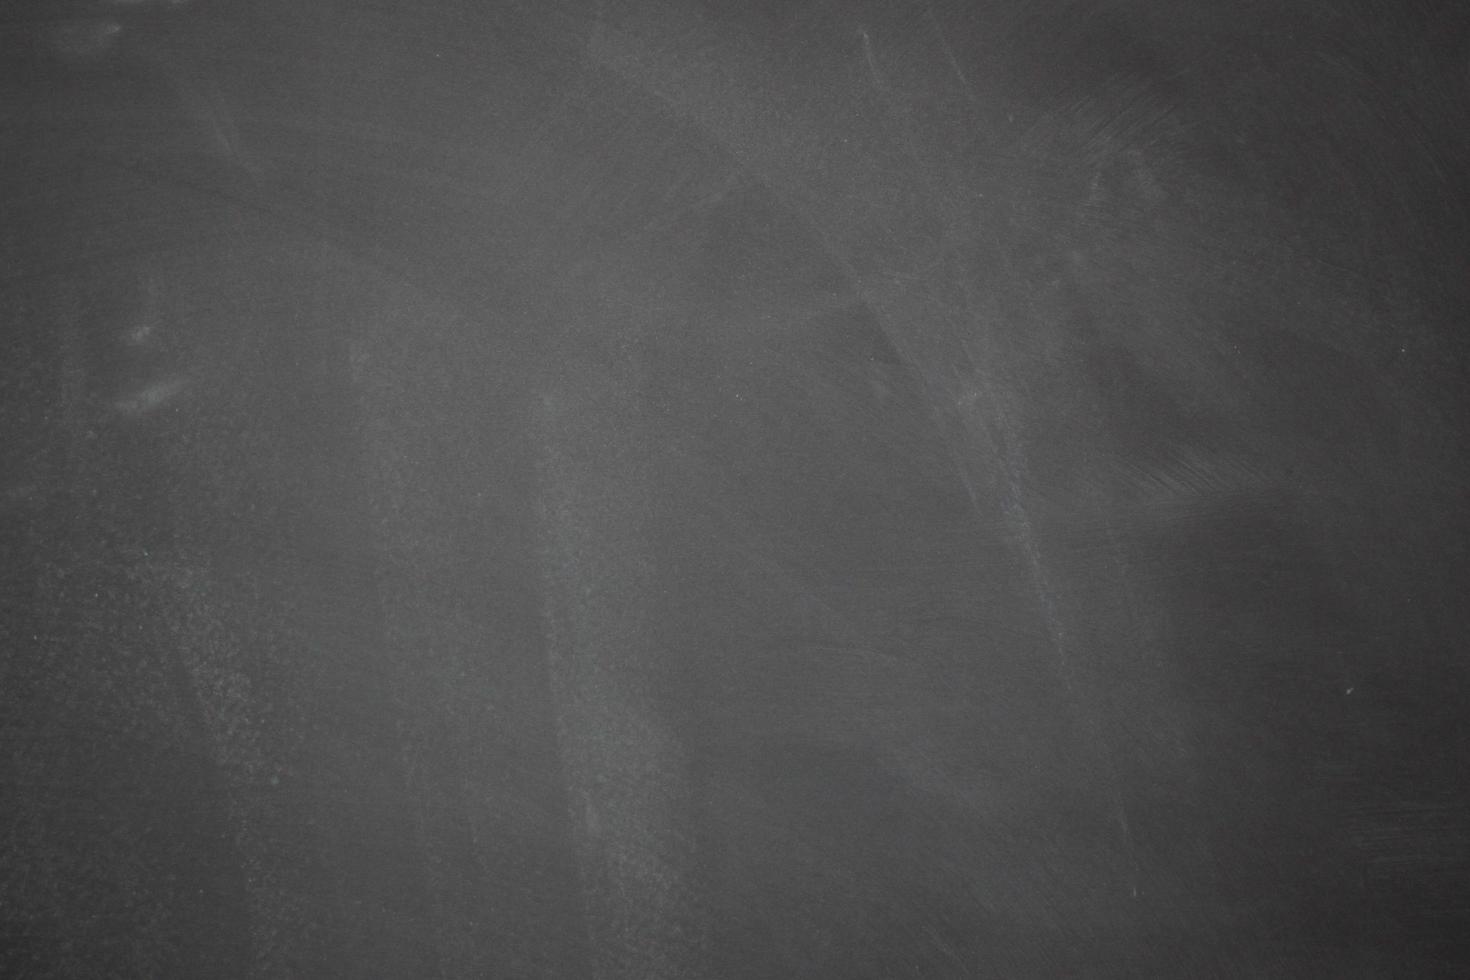 Black background. Blackboard. Grunge texture. Chalkboard. background chalk board Chalk rubbed out on blackboard texture for add text or graphic design. education concept photo